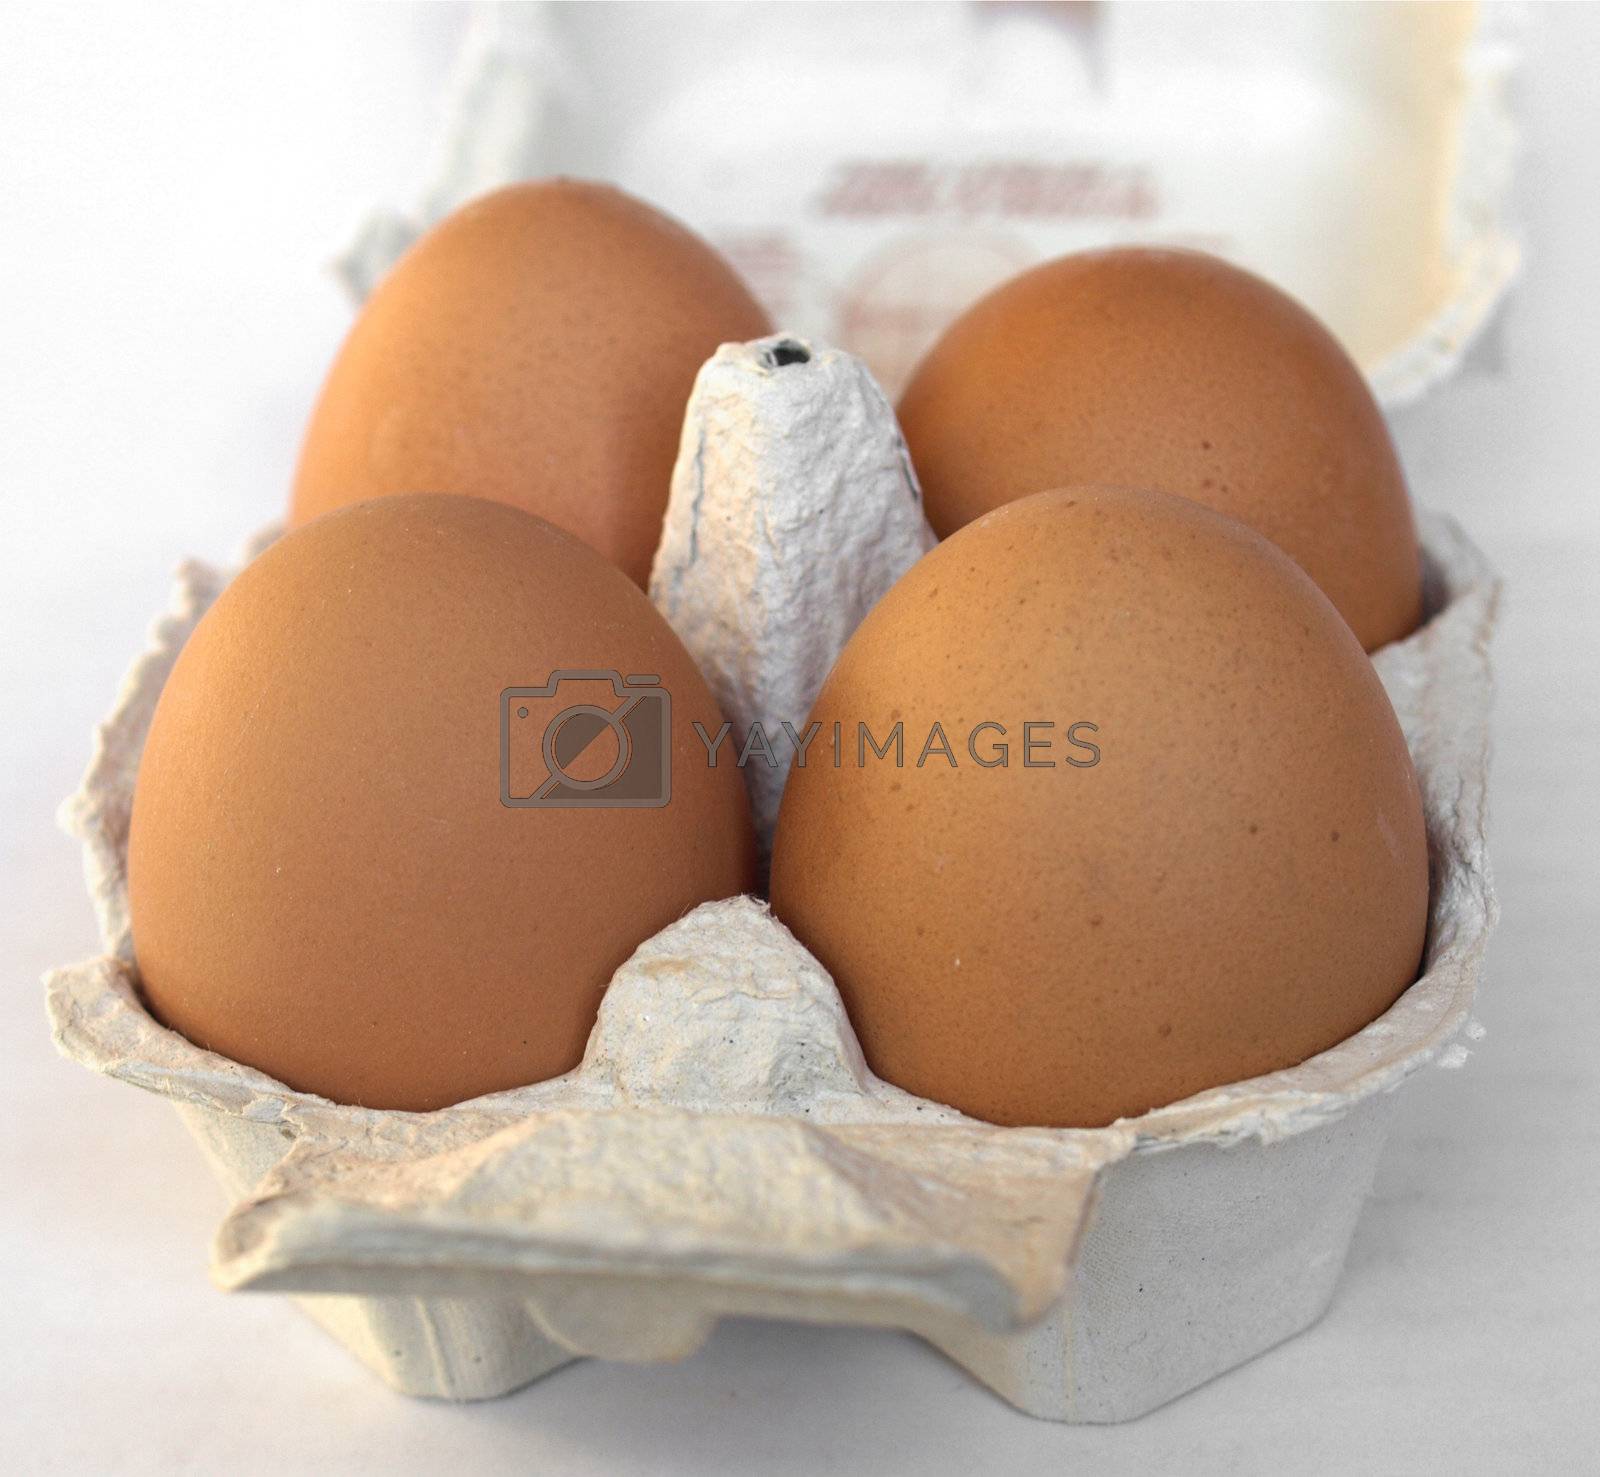 Royalty free image of Eggs by claudiodivizia